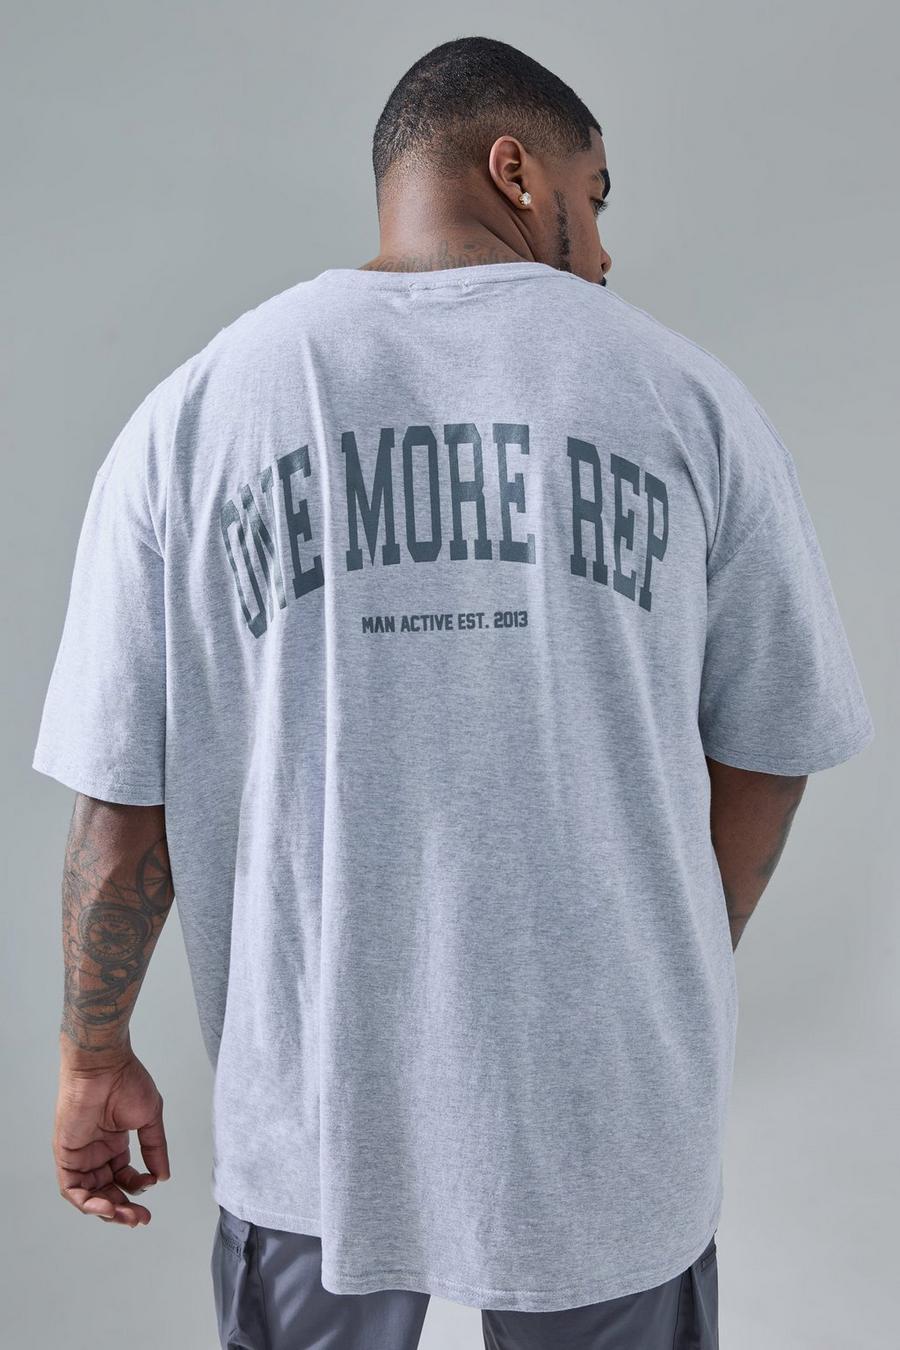 Plus Oversize Man Active T-Shirt mit One More Rep Print, Grey marl